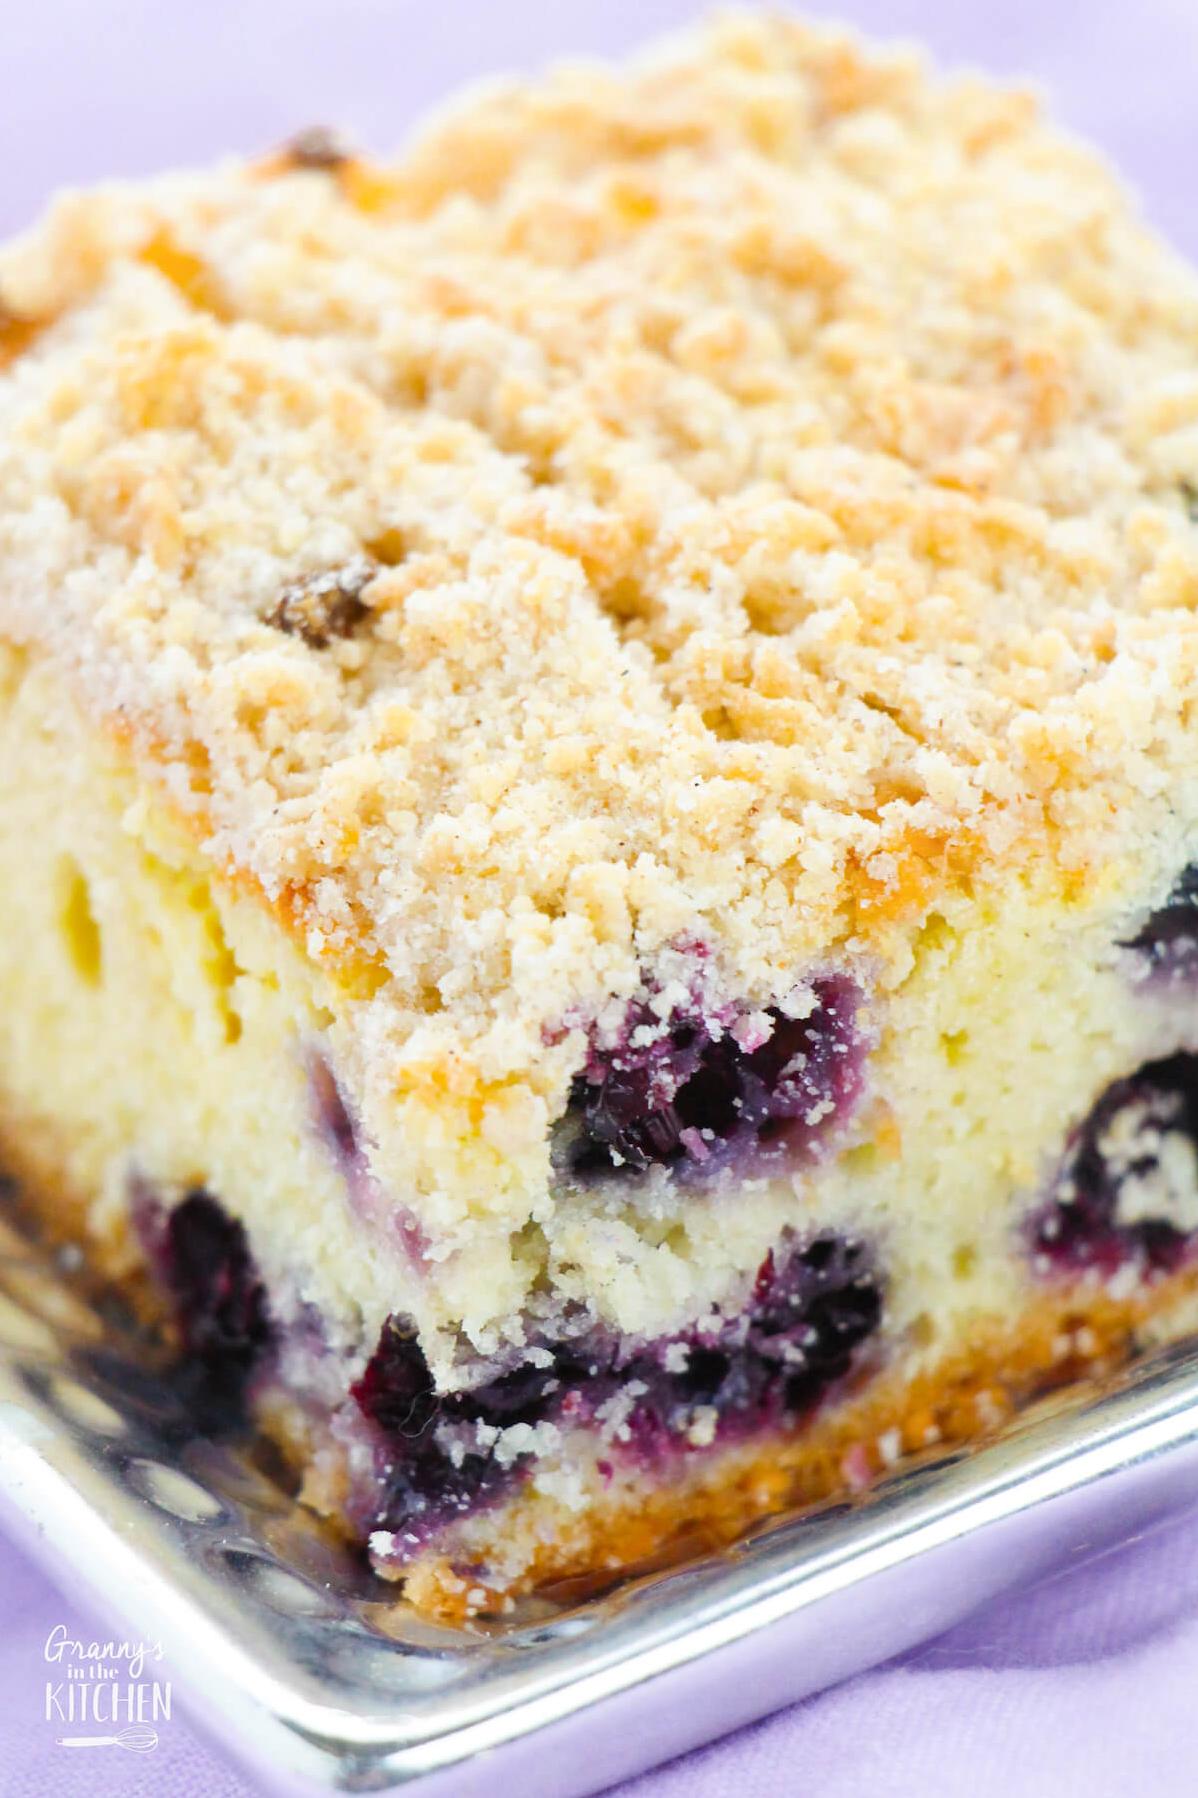  Take a bite of nostalgia with this classic blueberry buckle recipe that never goes out of style.